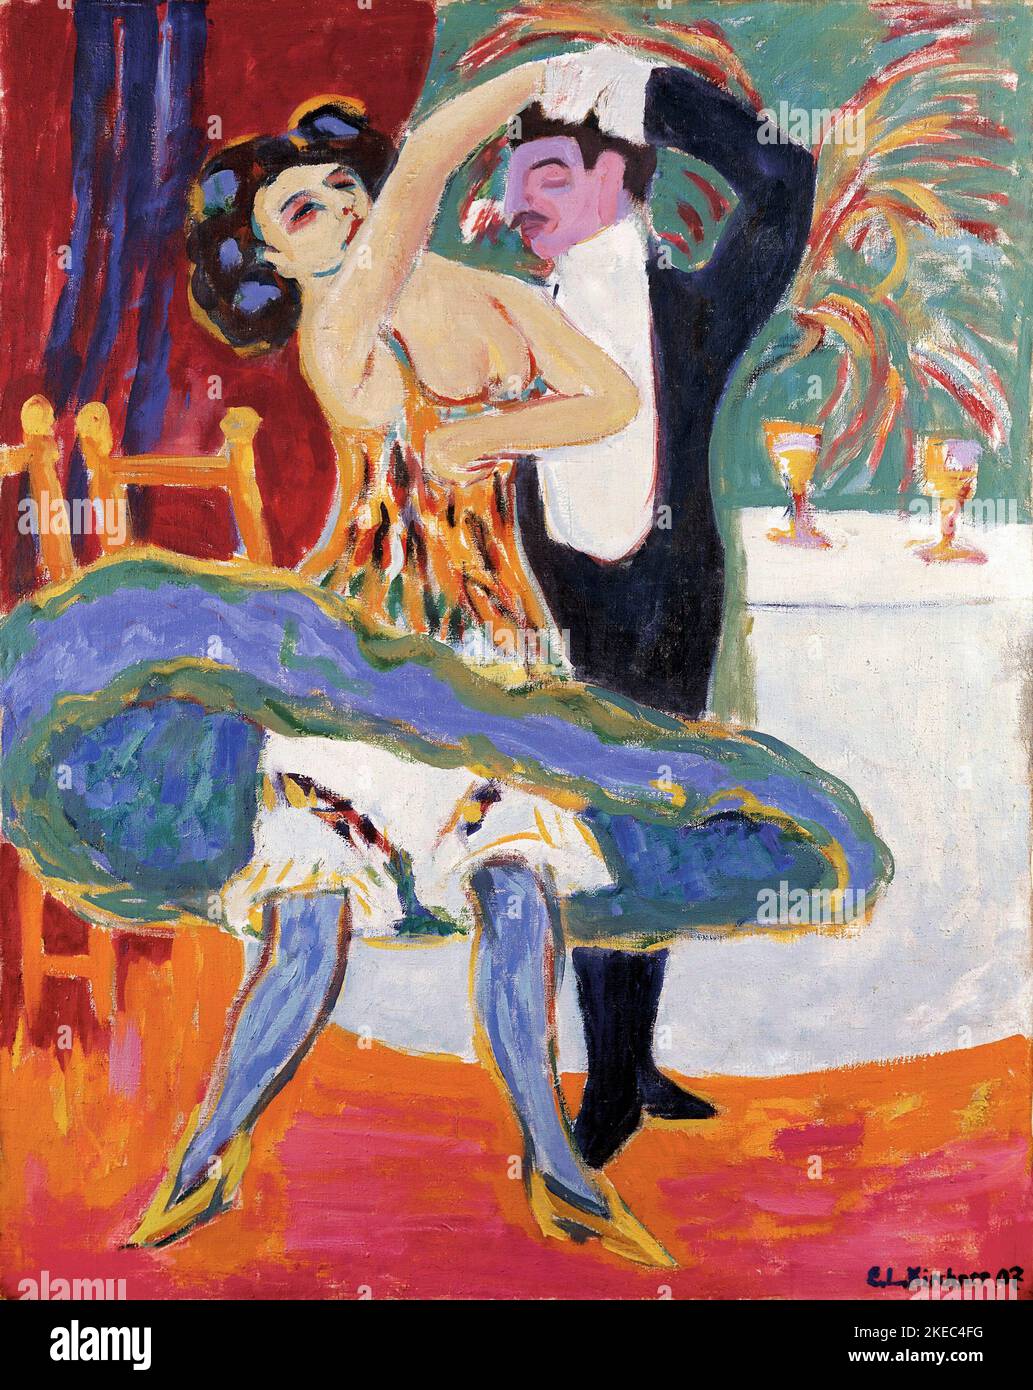 Vaudeville Theater (English Dancing Couple) by Ernst Ludwig Kirchner (1880-1938), oil on canvas, c. 1909 Stock Photo